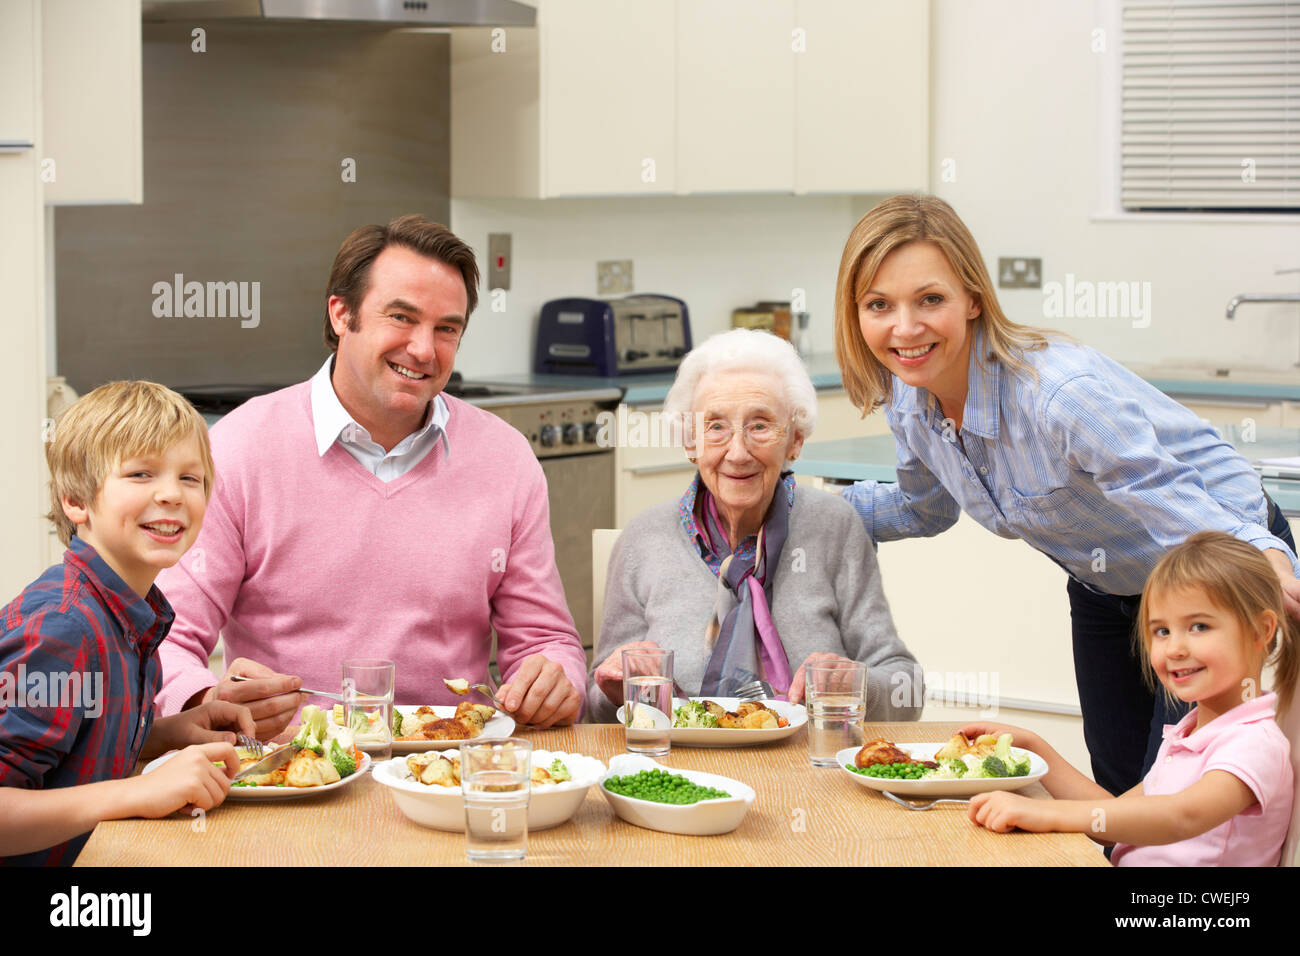 Multi-generation family sharing meal together Stock Photo